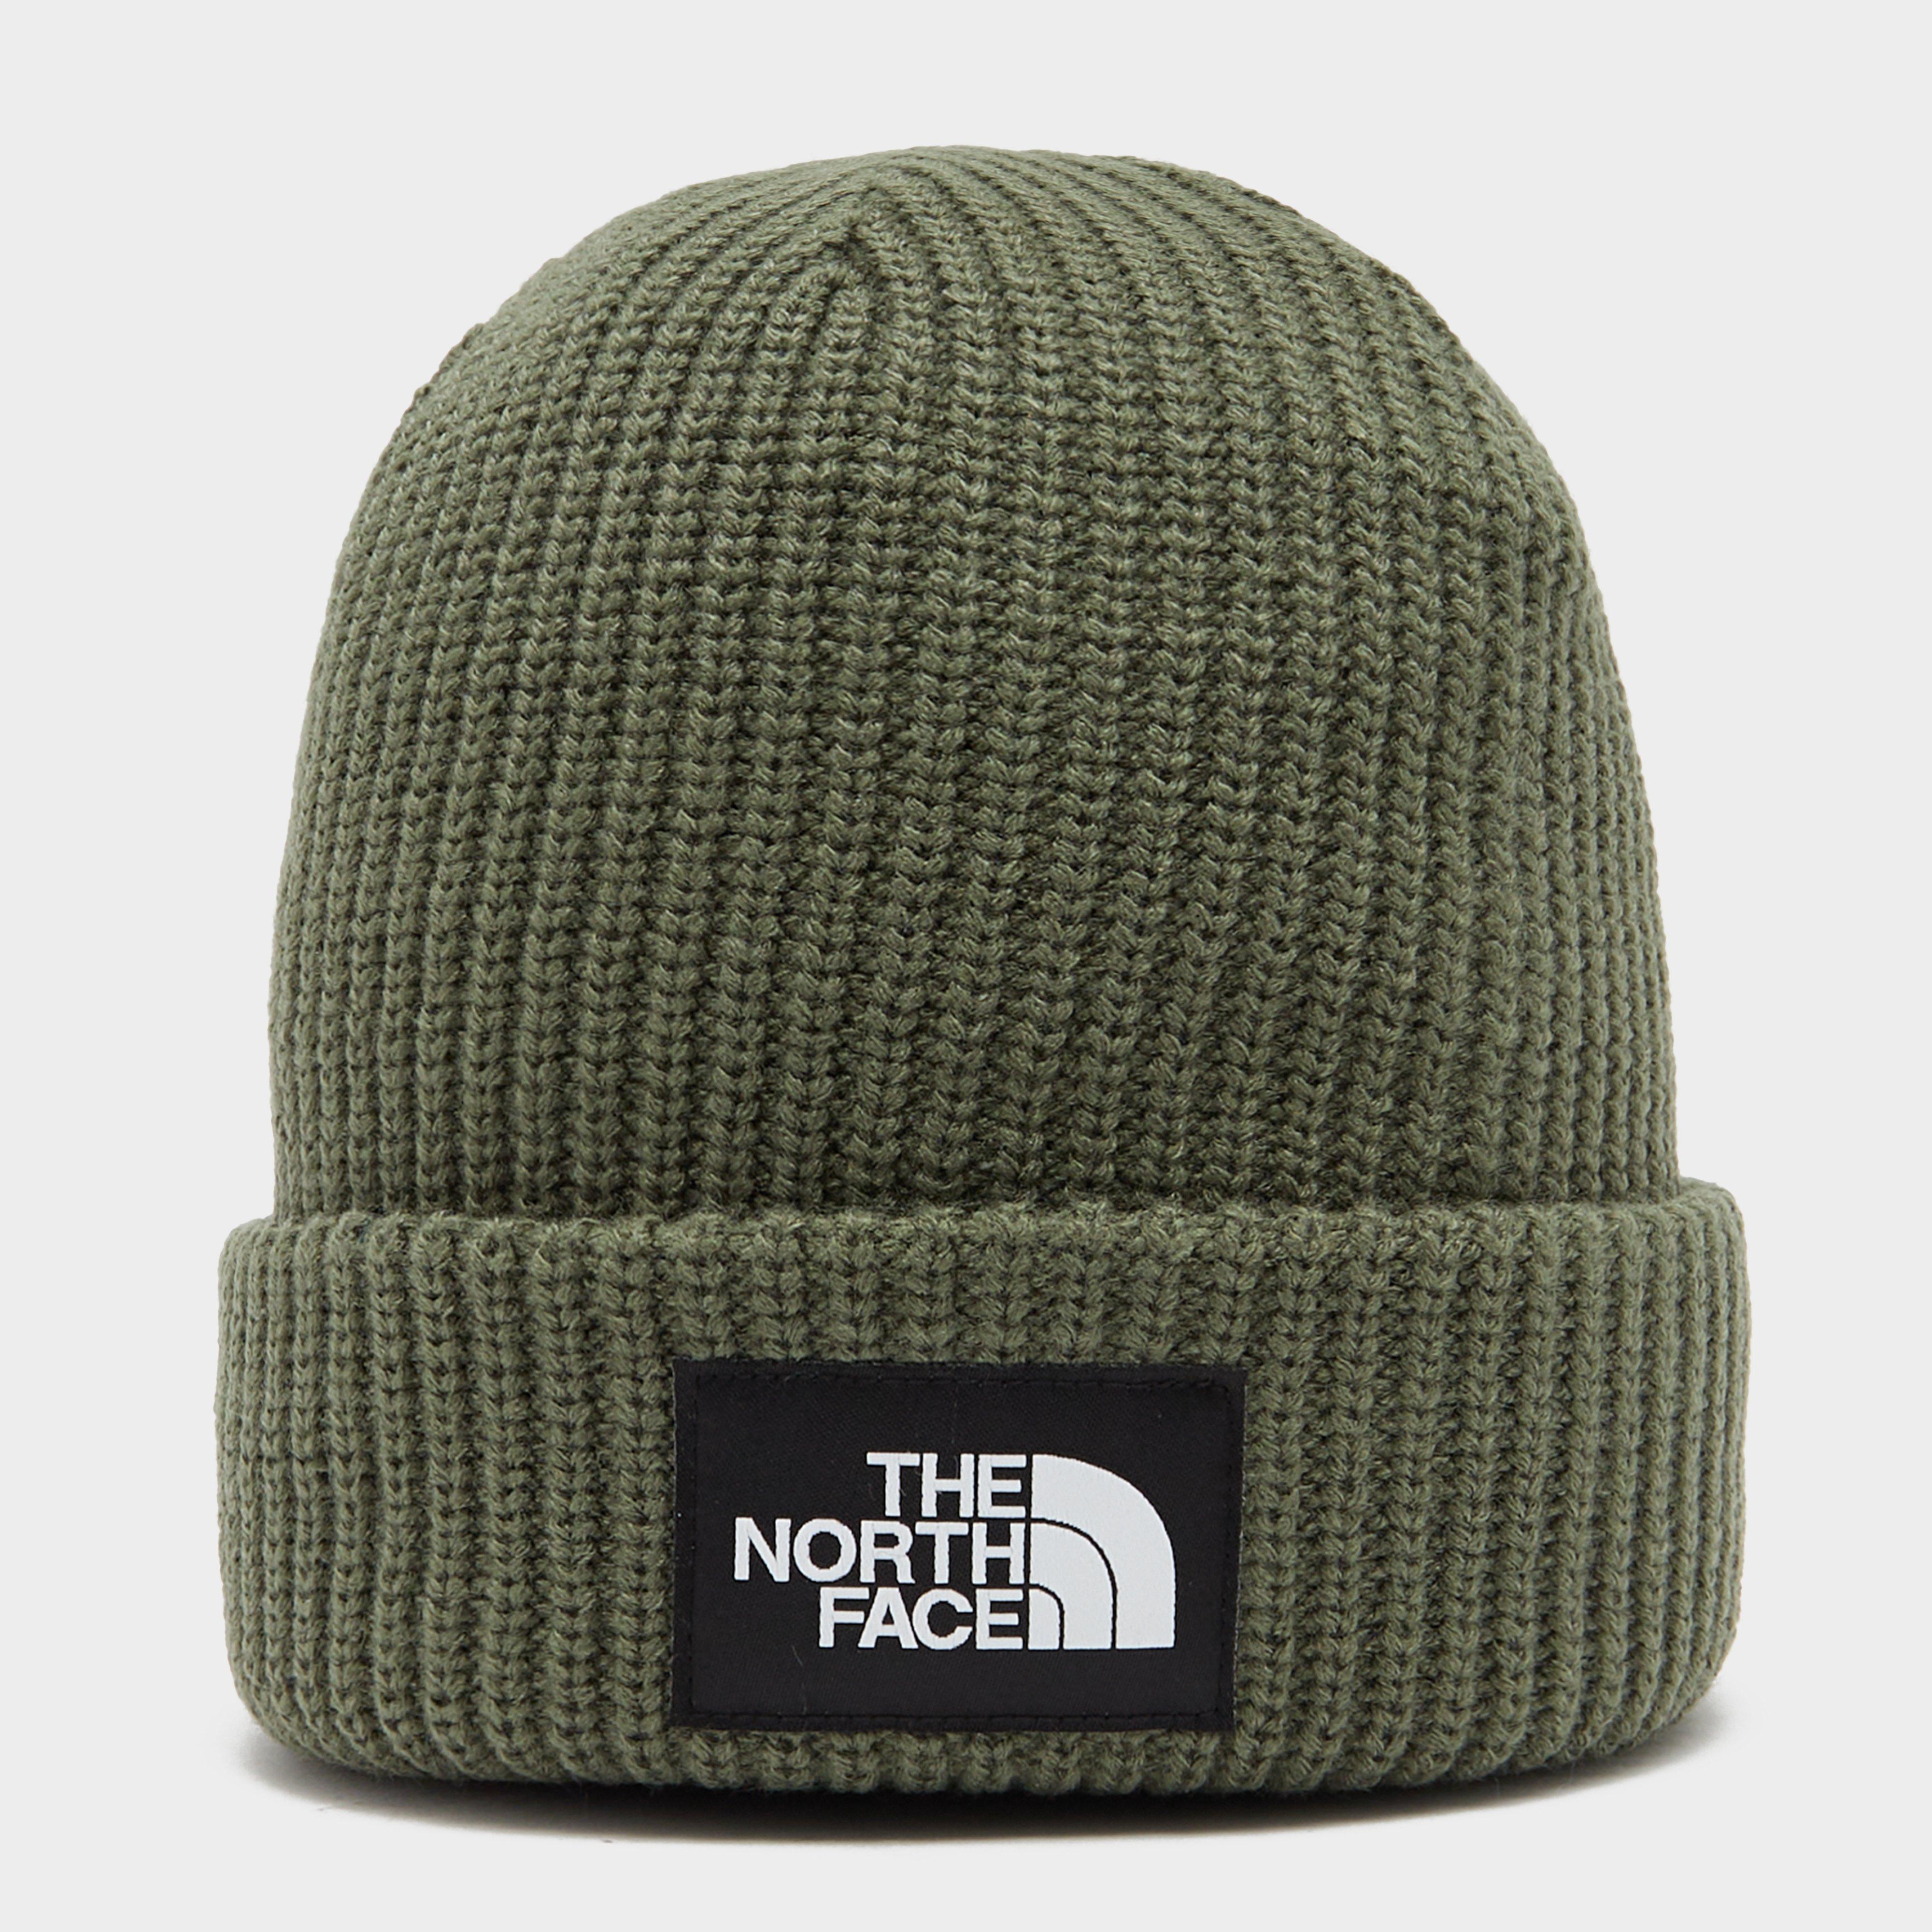 The North Face Mens Salty Dog Beanie - Green/green  Green/green